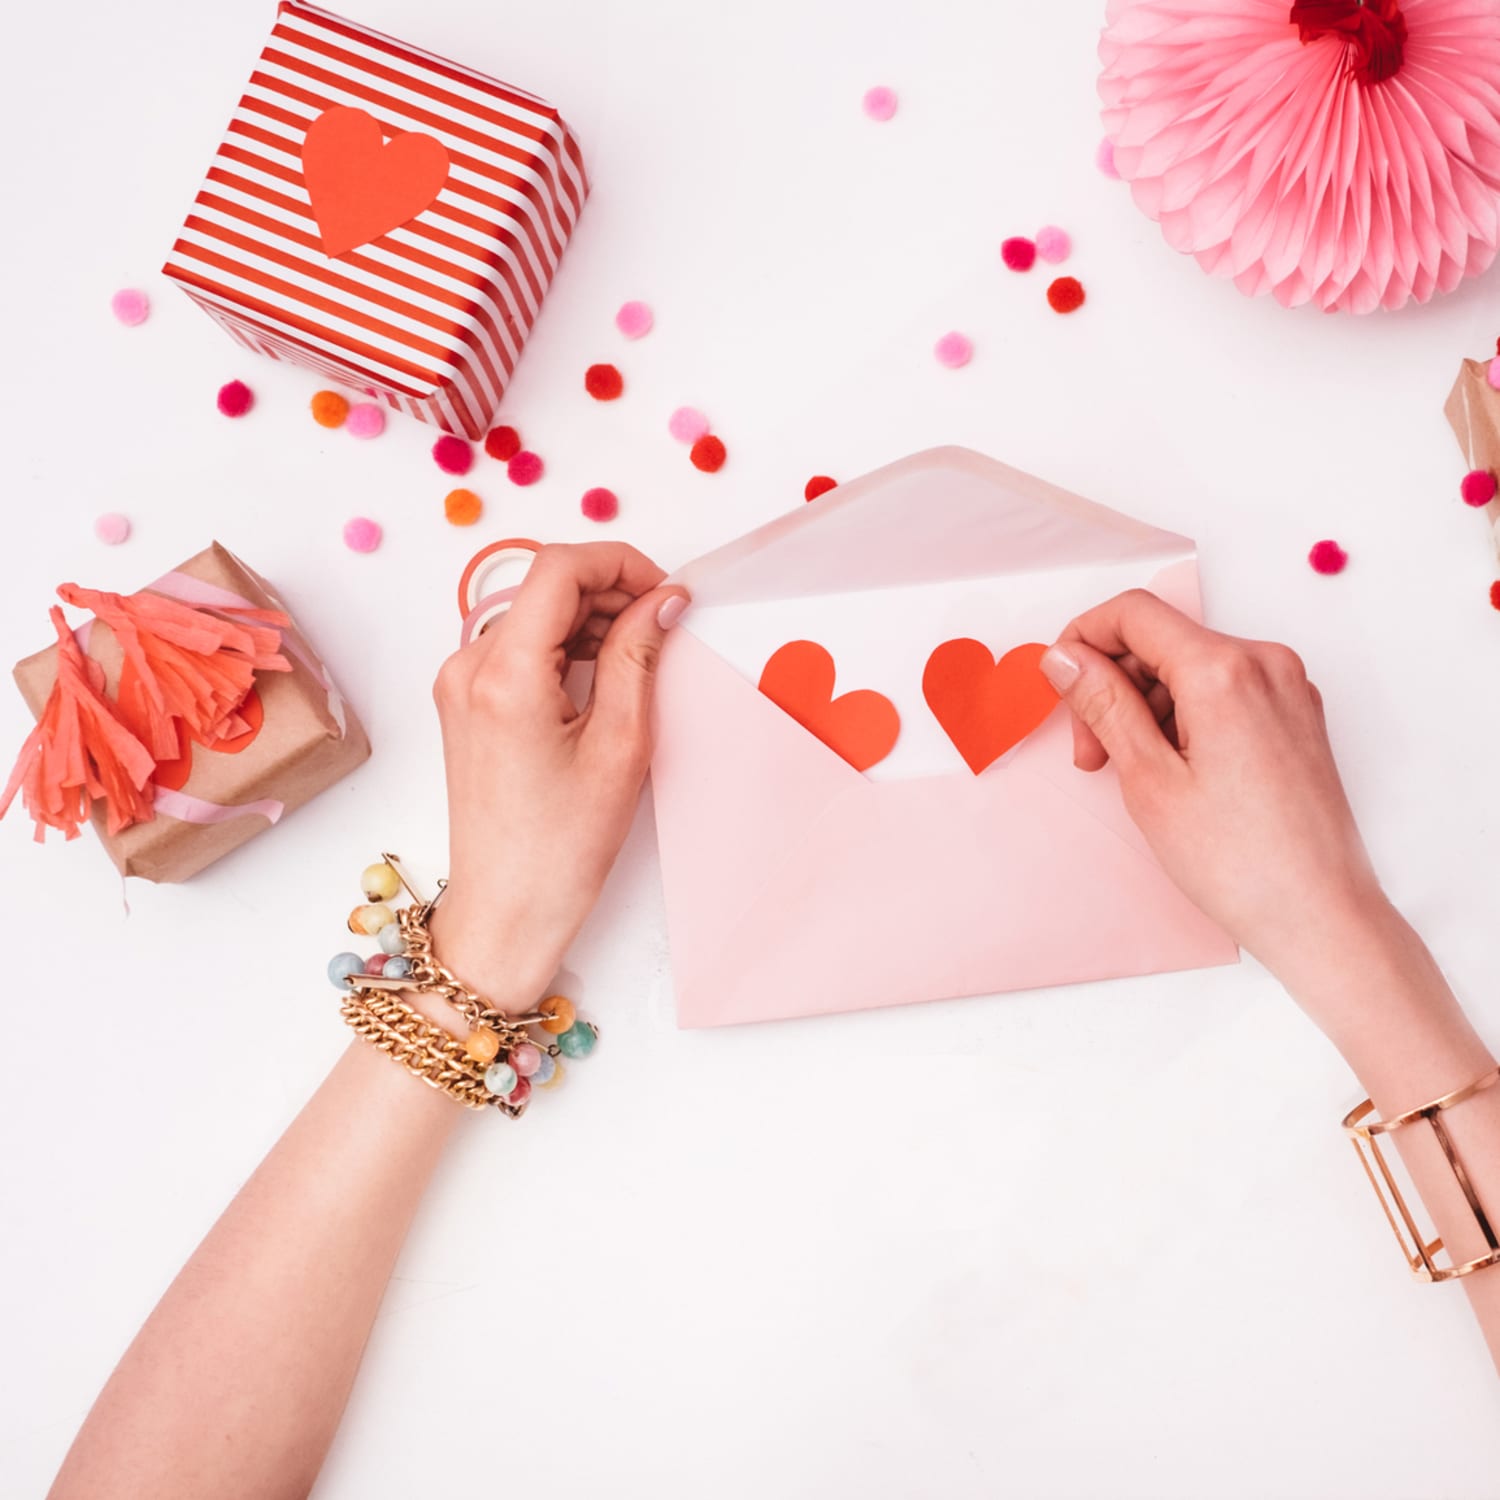 12 Healthy Alternatives To Traditional Valentine's Day Gift Ideas